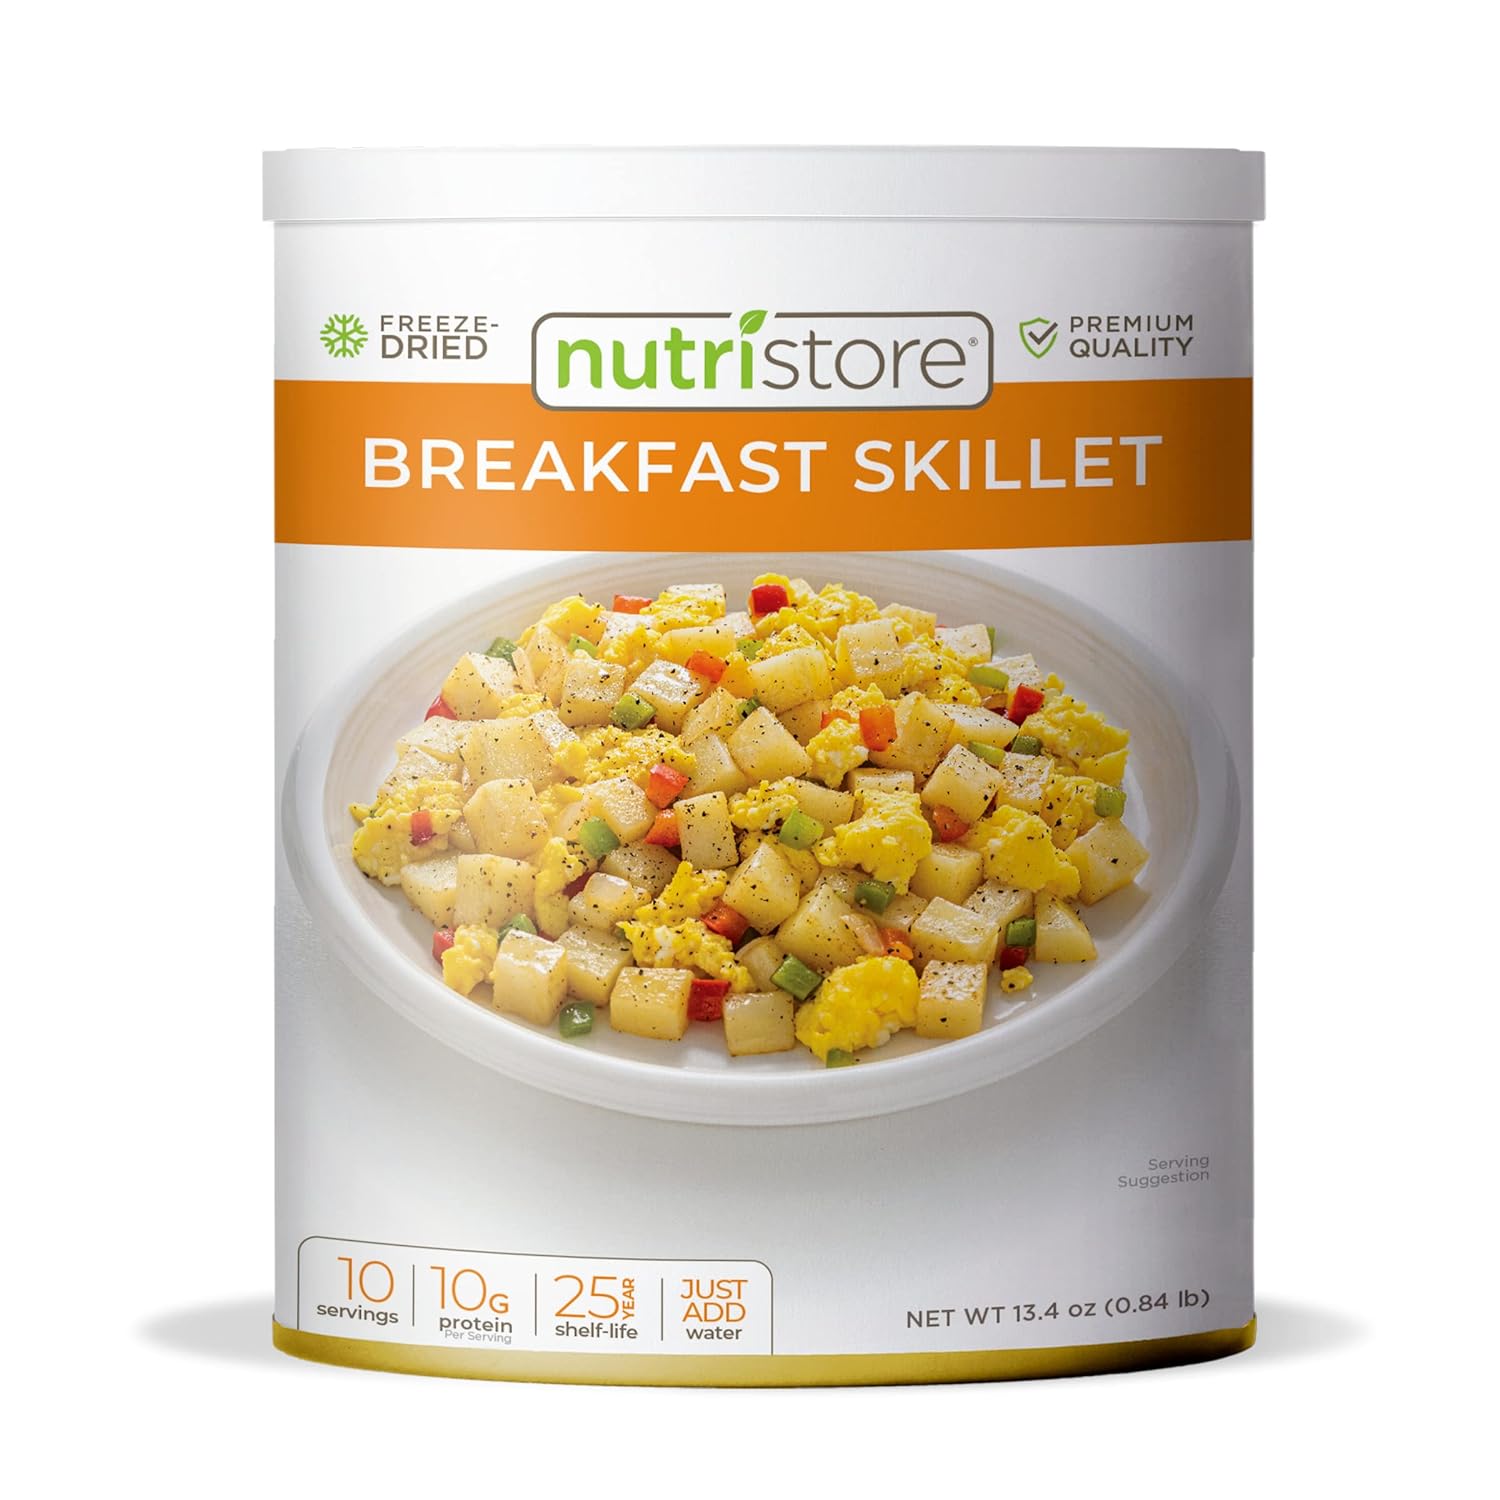 Nutristore Freeze-Dried Breakfast Skillet | Emergency Survival Bulk Food Storage Meal | Perfect for Everyday Quick Meals and Long-Term Storage | 25 Year Shelf Life | USDA Inspected (1-Pack)